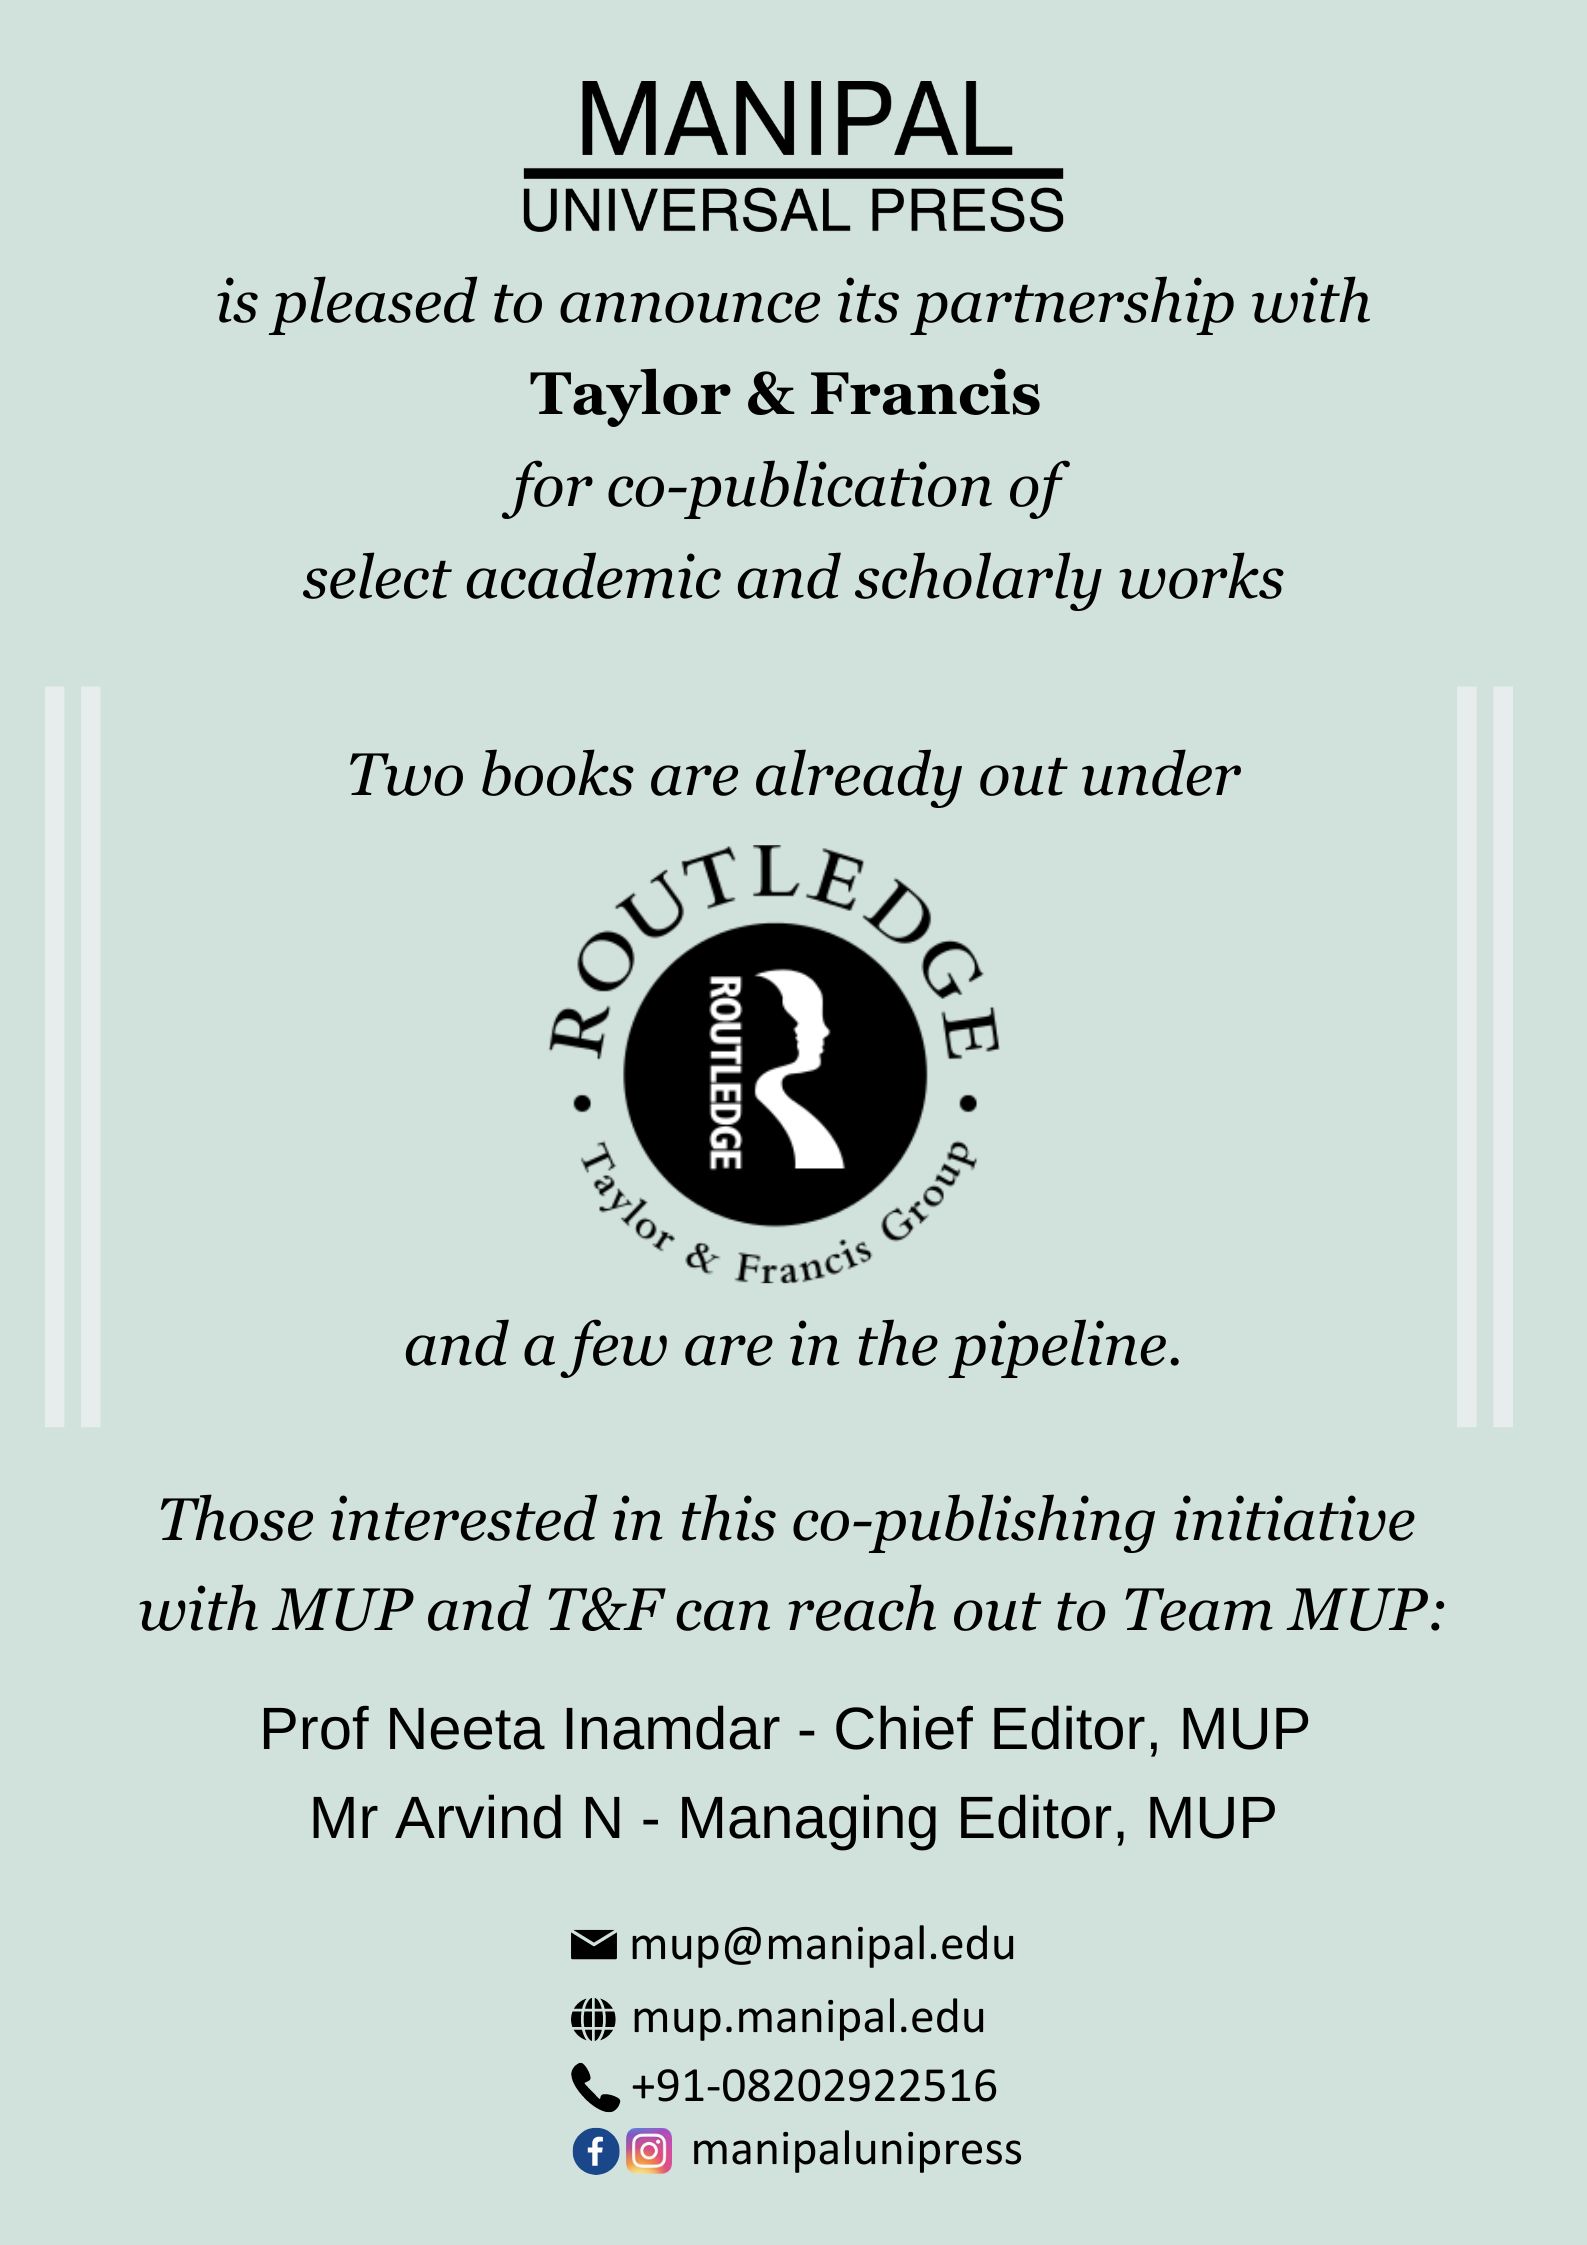 MUP and T&F co-publish select academic and scholarly works.